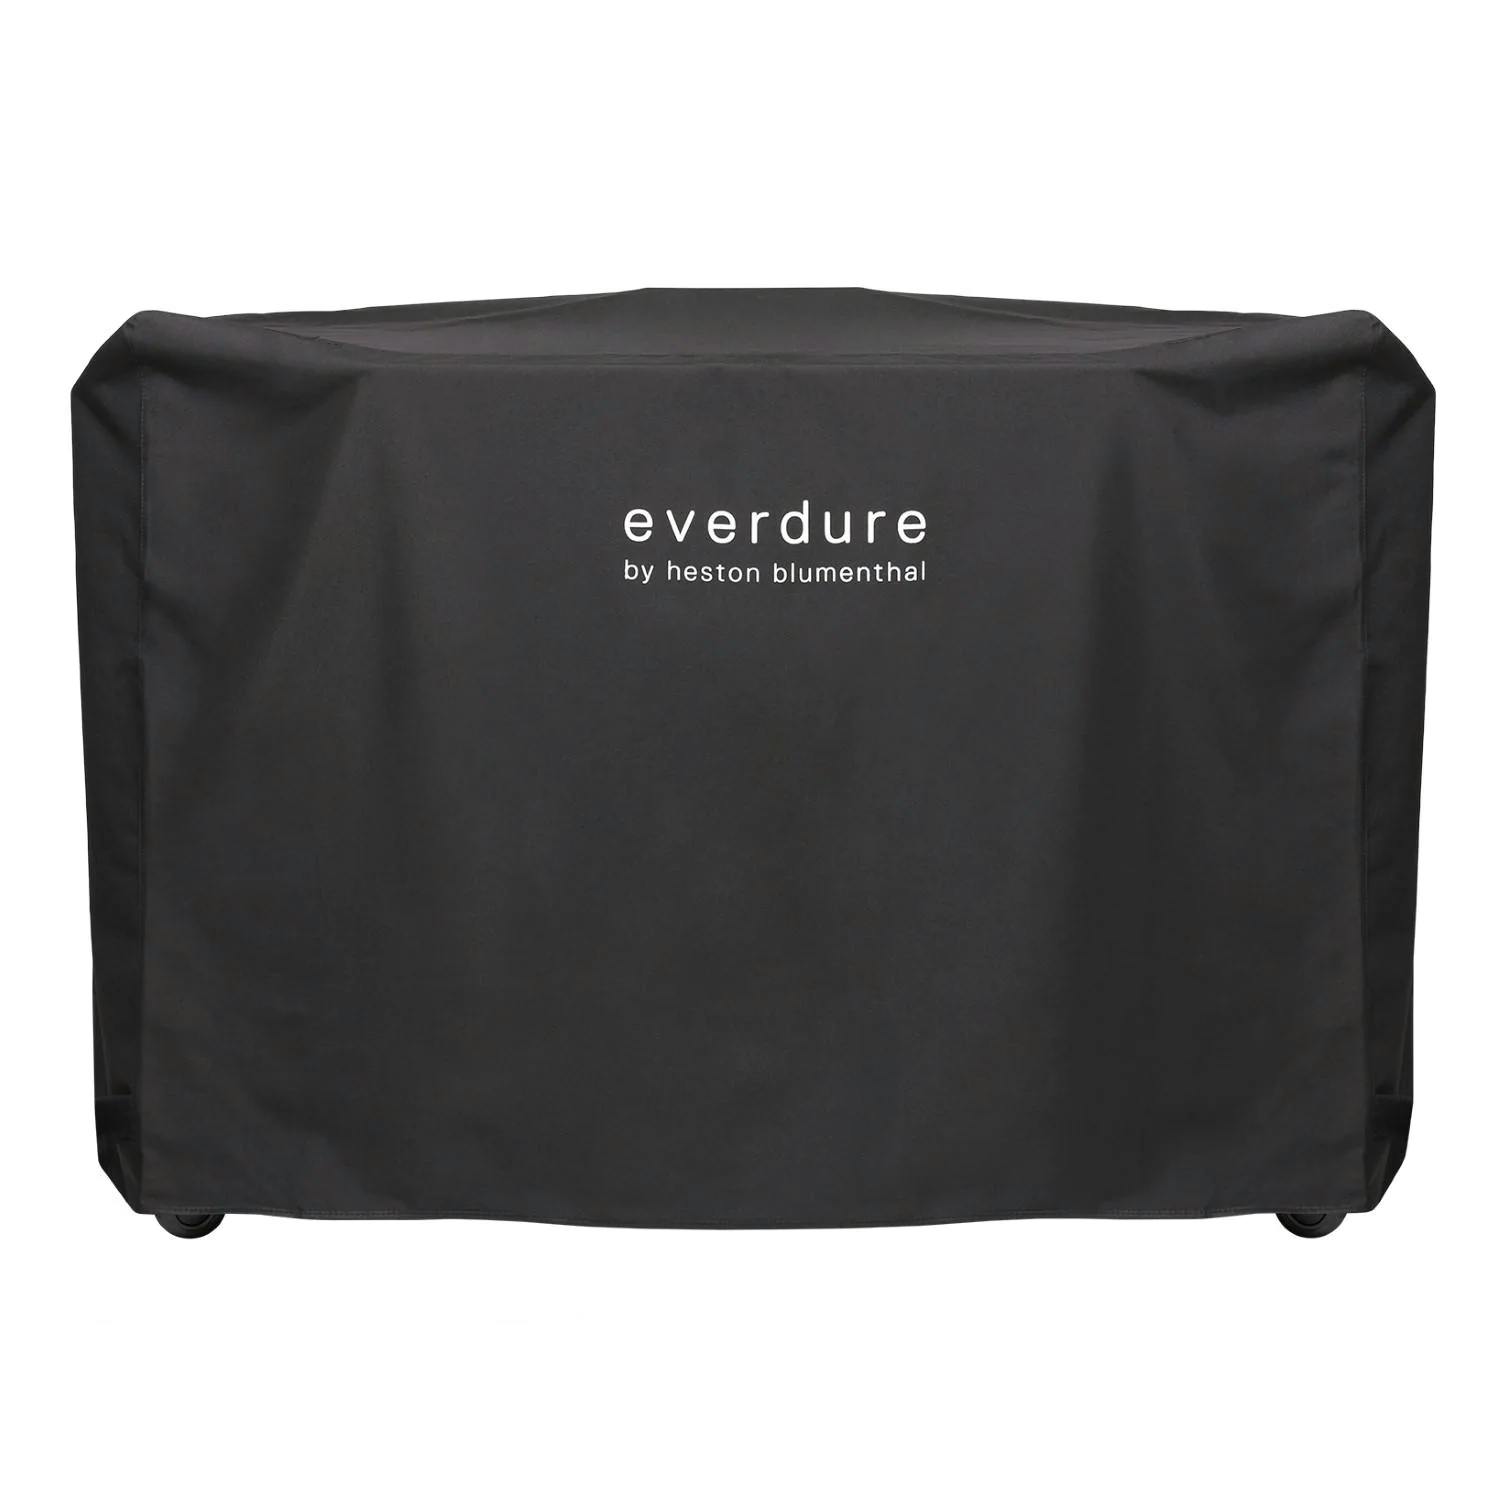 Everdure by Heston Blumenthal Long Grill Cover for HUB 54 in. Charcoal Grill